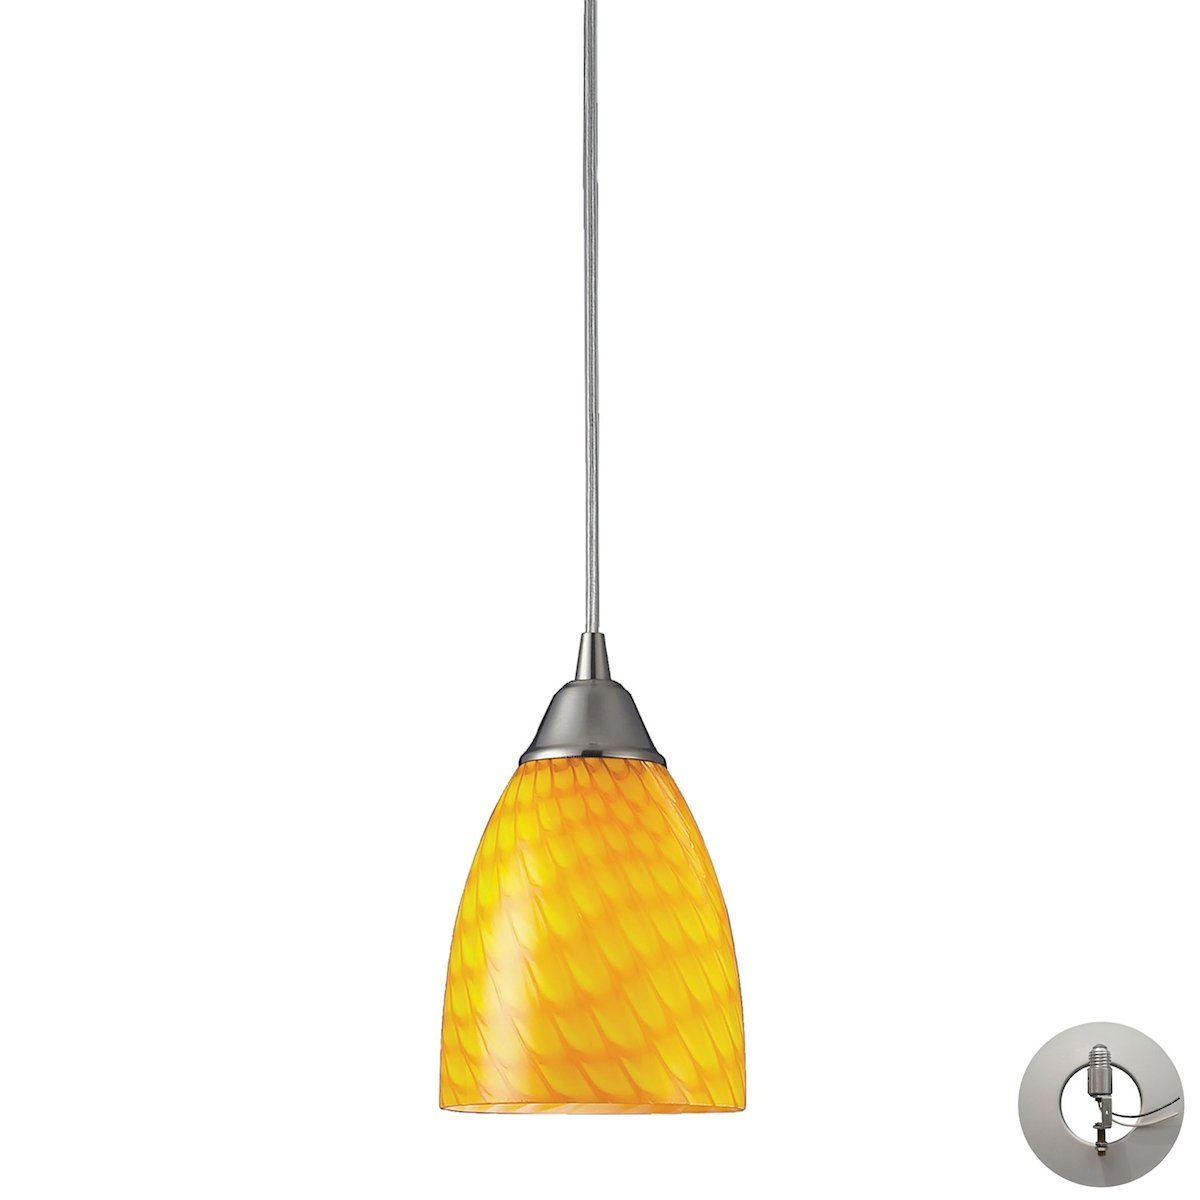 Arco Baleno 1 Light Pendant In Satin Nickel And Canary Glass With Adapter Kit Ceiling Elk Lighting 